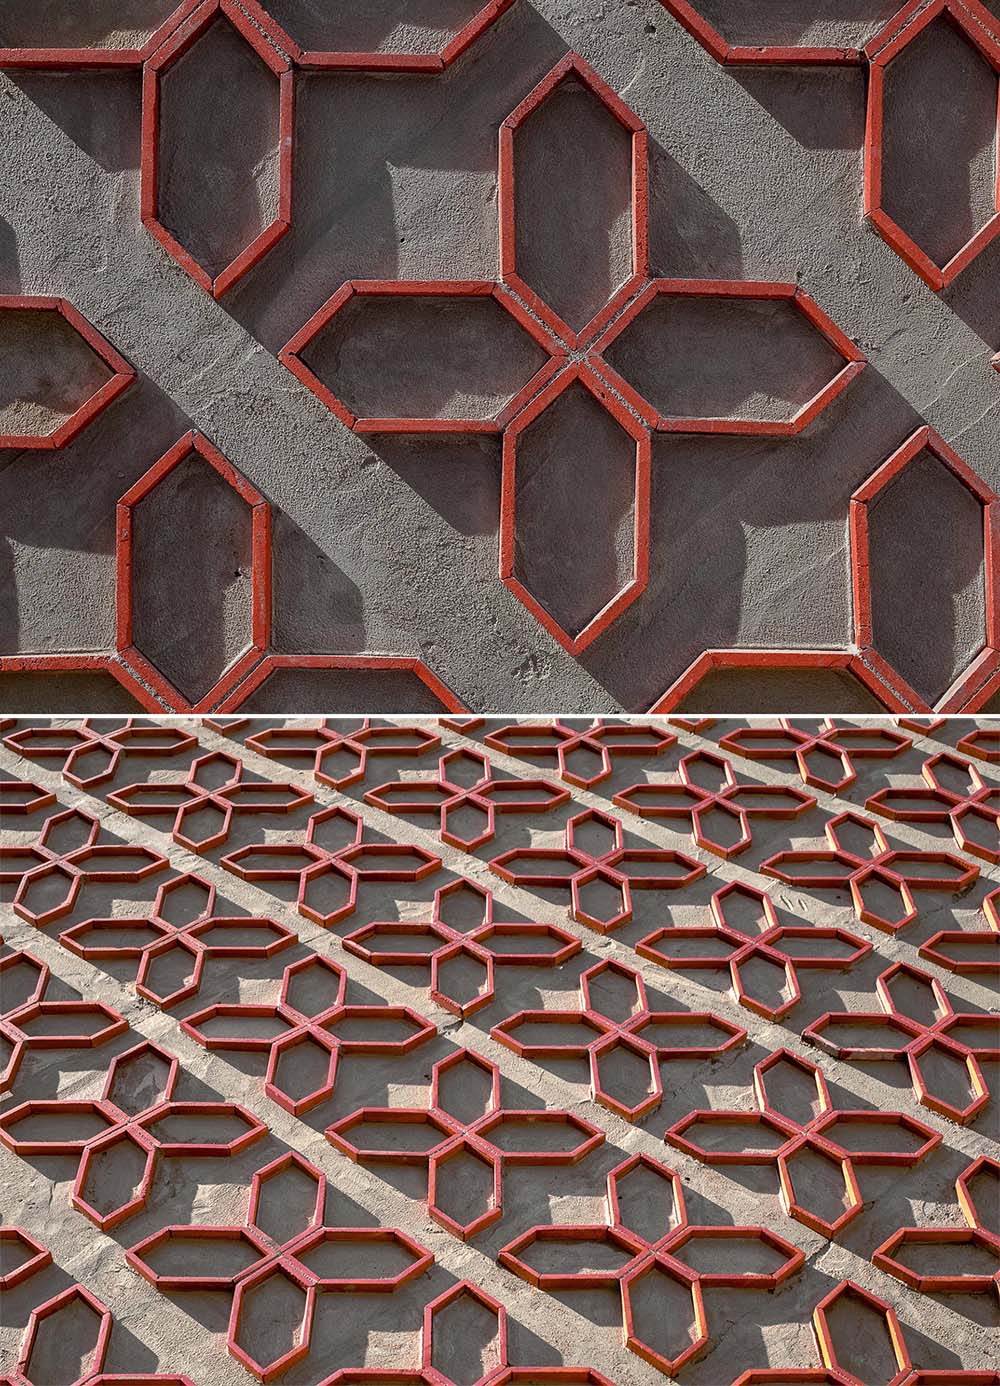 A patterned wall made from cut clay roof tiles.